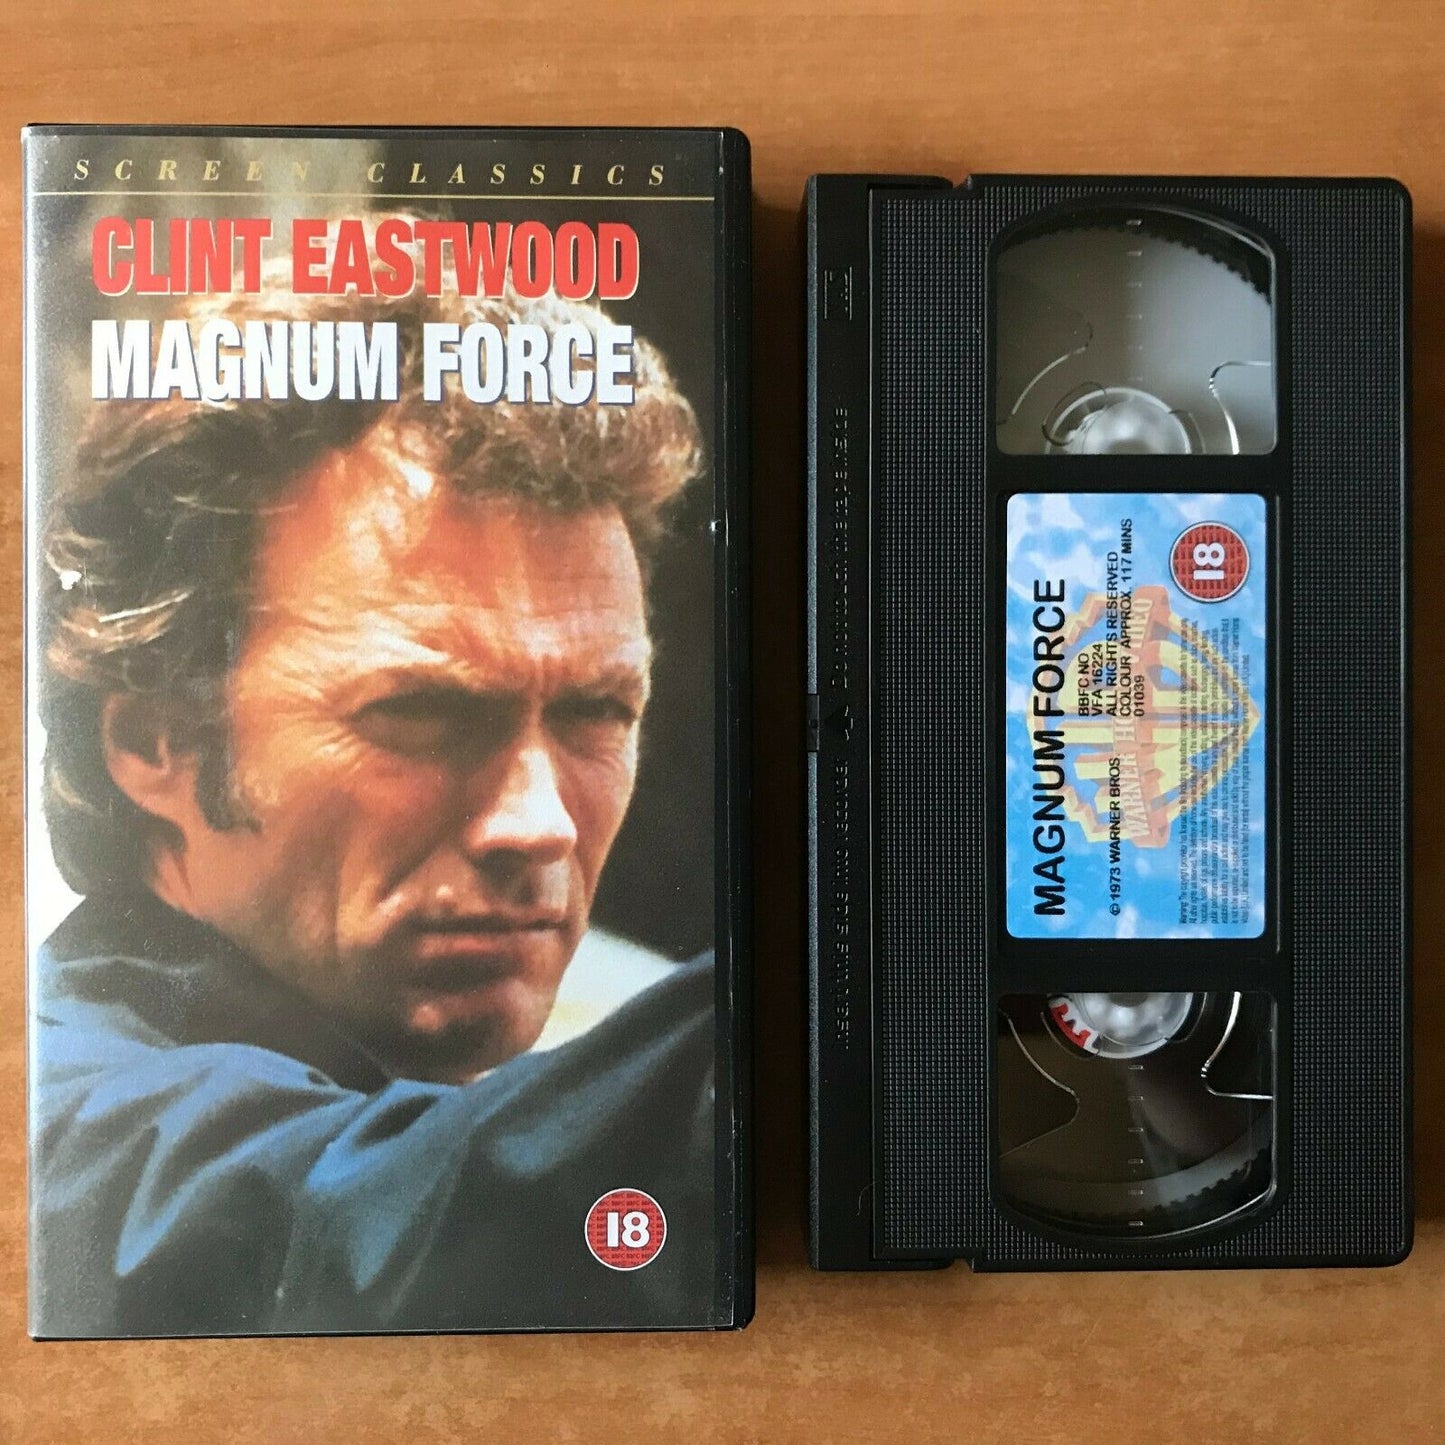 Magnum Force (1973); [Dirty Harry]: 44 Magnum Action - Clint Eastwood - Pal VHS-